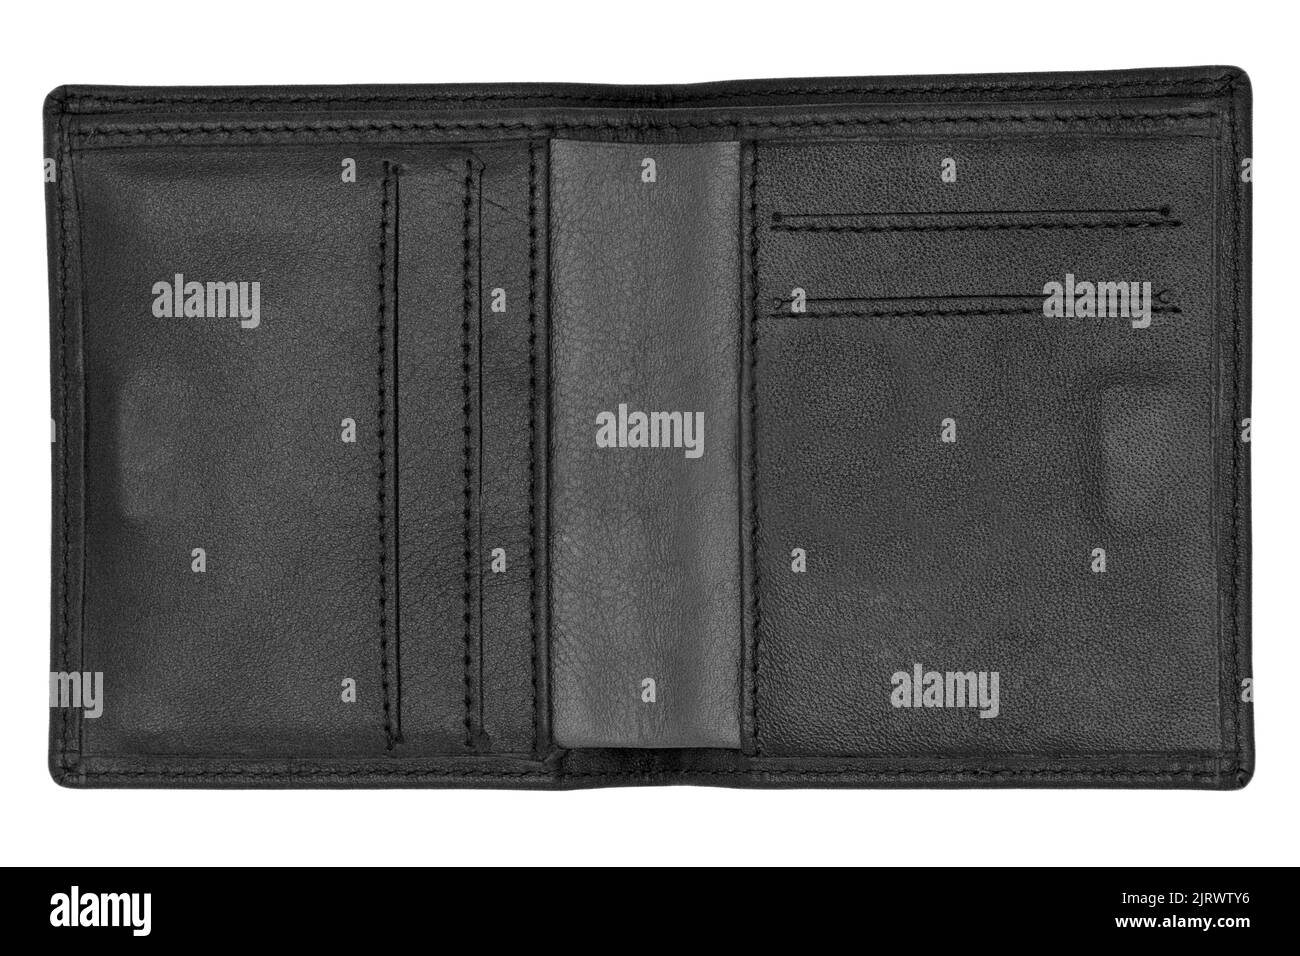 Leather pocket Black and White Stock Photos & Images - Alamy